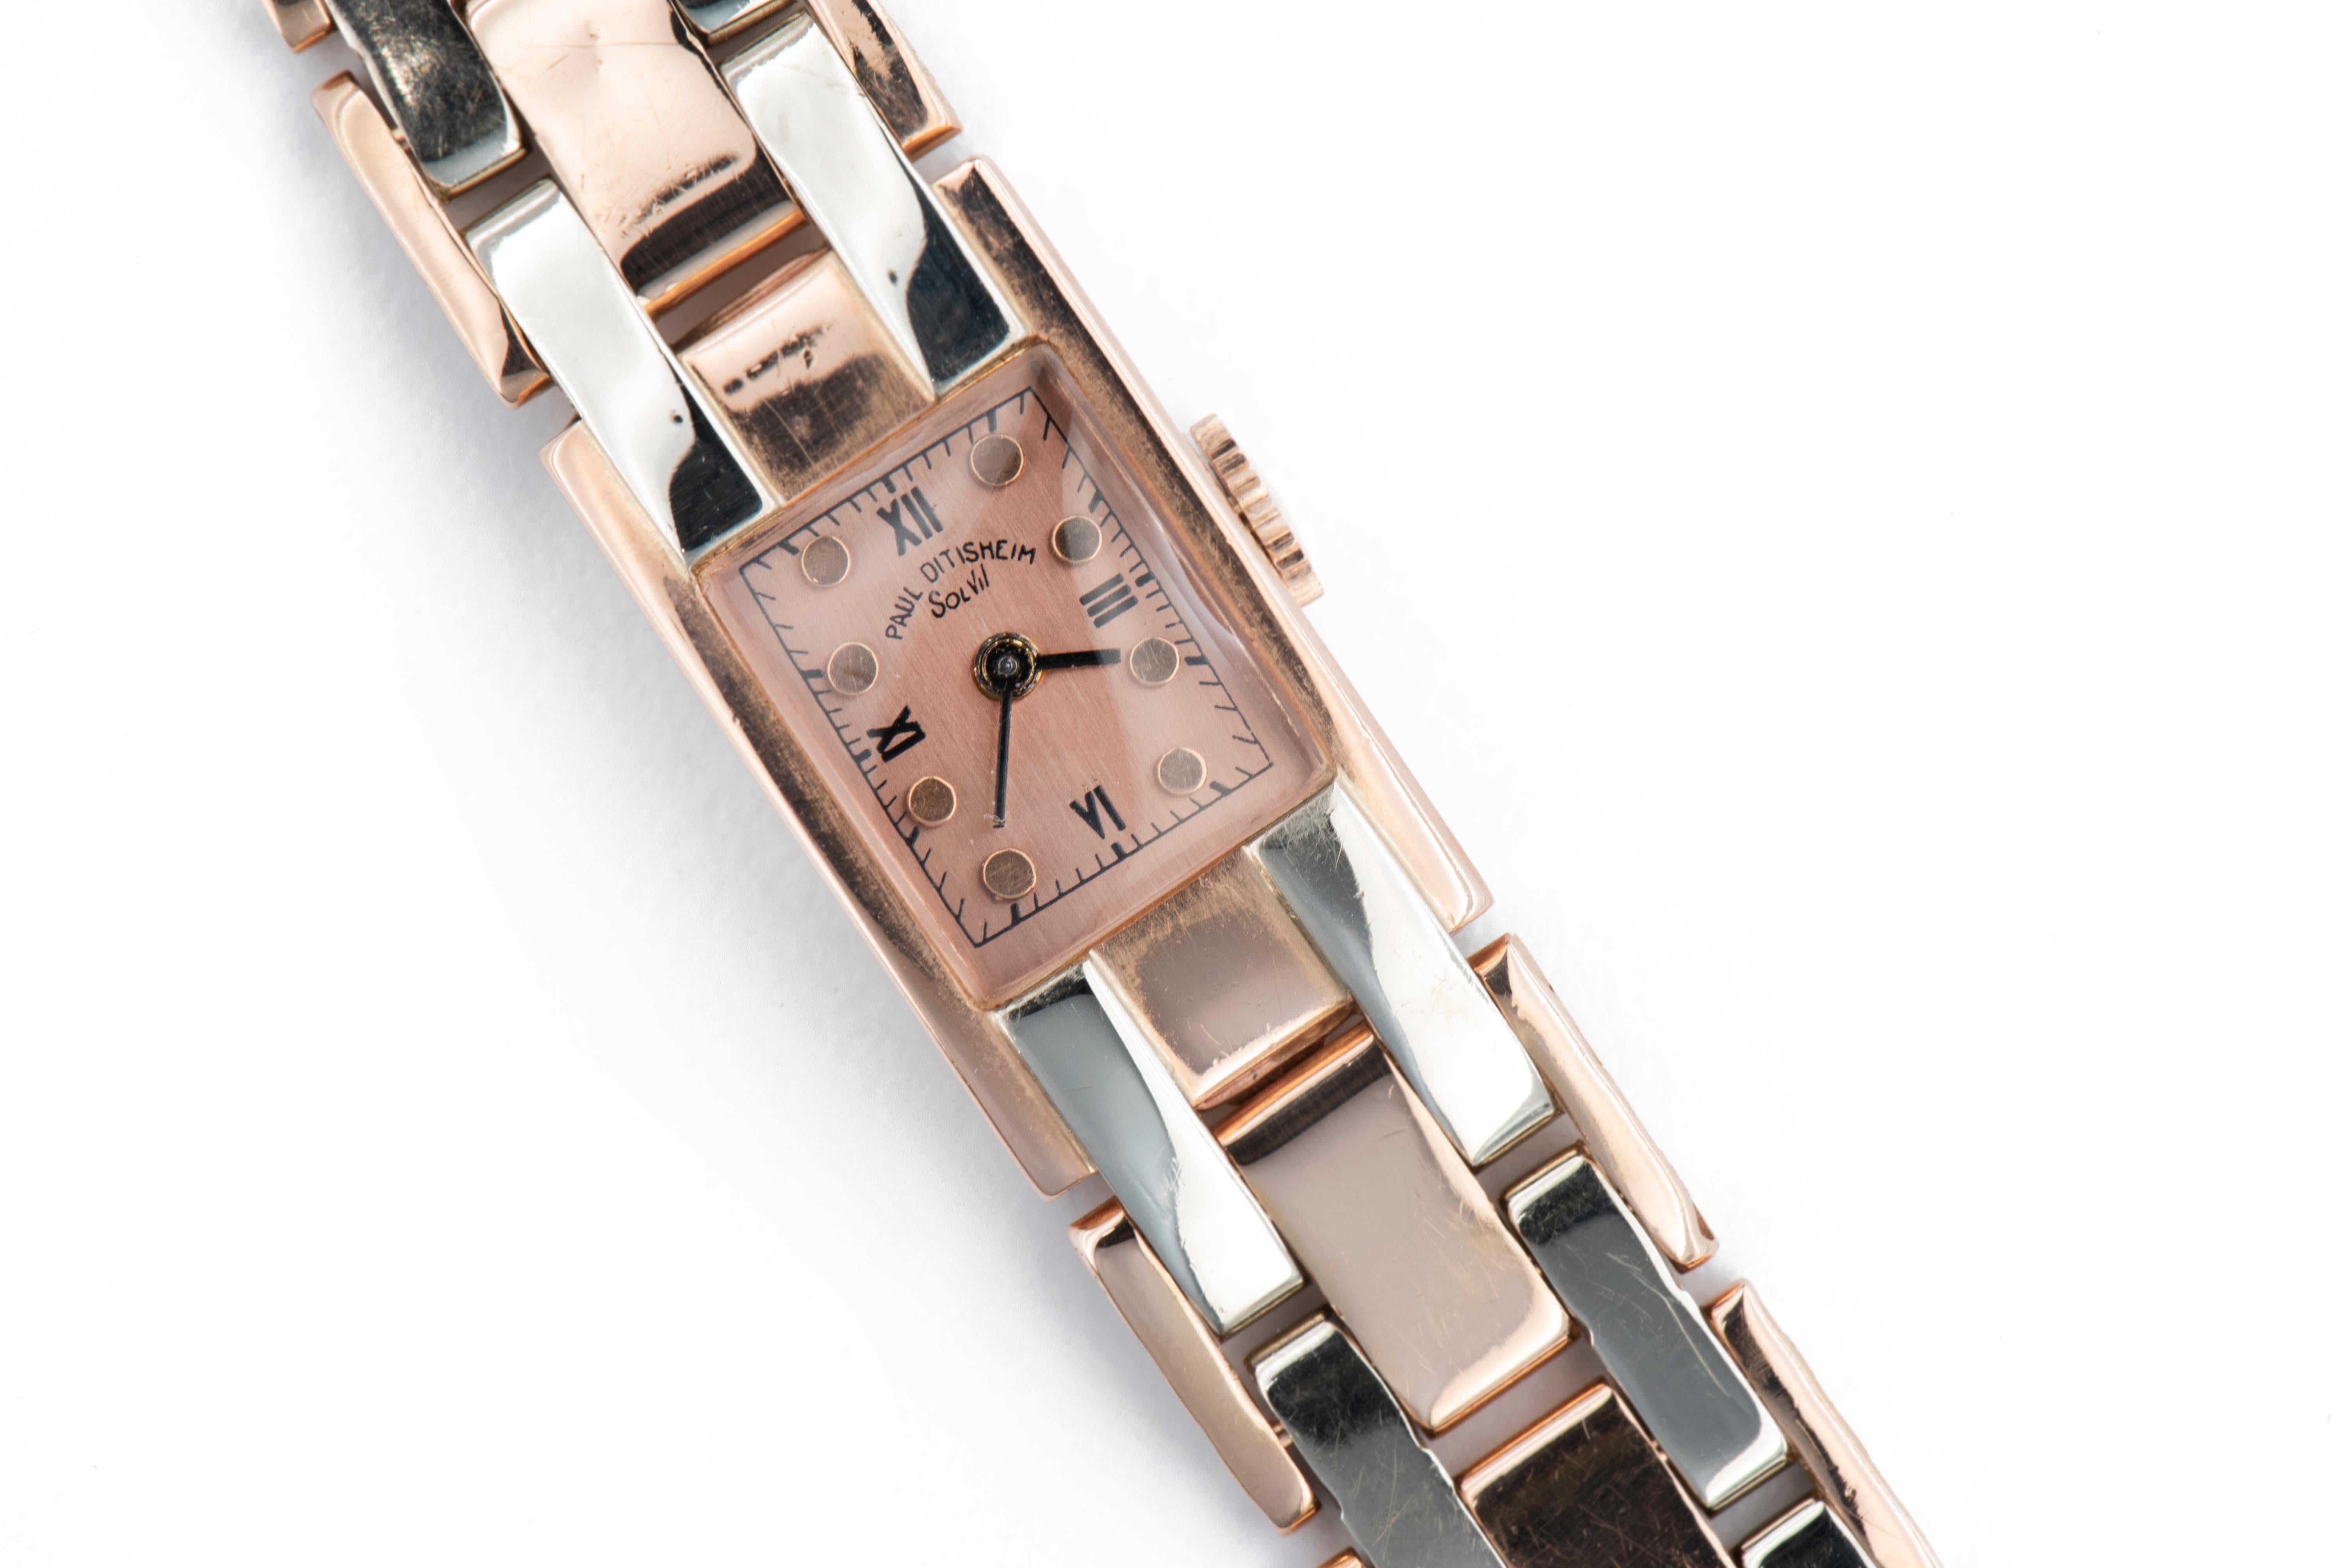 Paul Ditisheim Solvil 14K Rose Gold Tank Watch Vintage 1940's
Rare 1940’s two-tone 14K rose and white gold Paul Ditisheim tank style watch. The 16mm x 25mm rectangular rose gold case has a domed crystal, rose gold dial with Roman quarter hours,